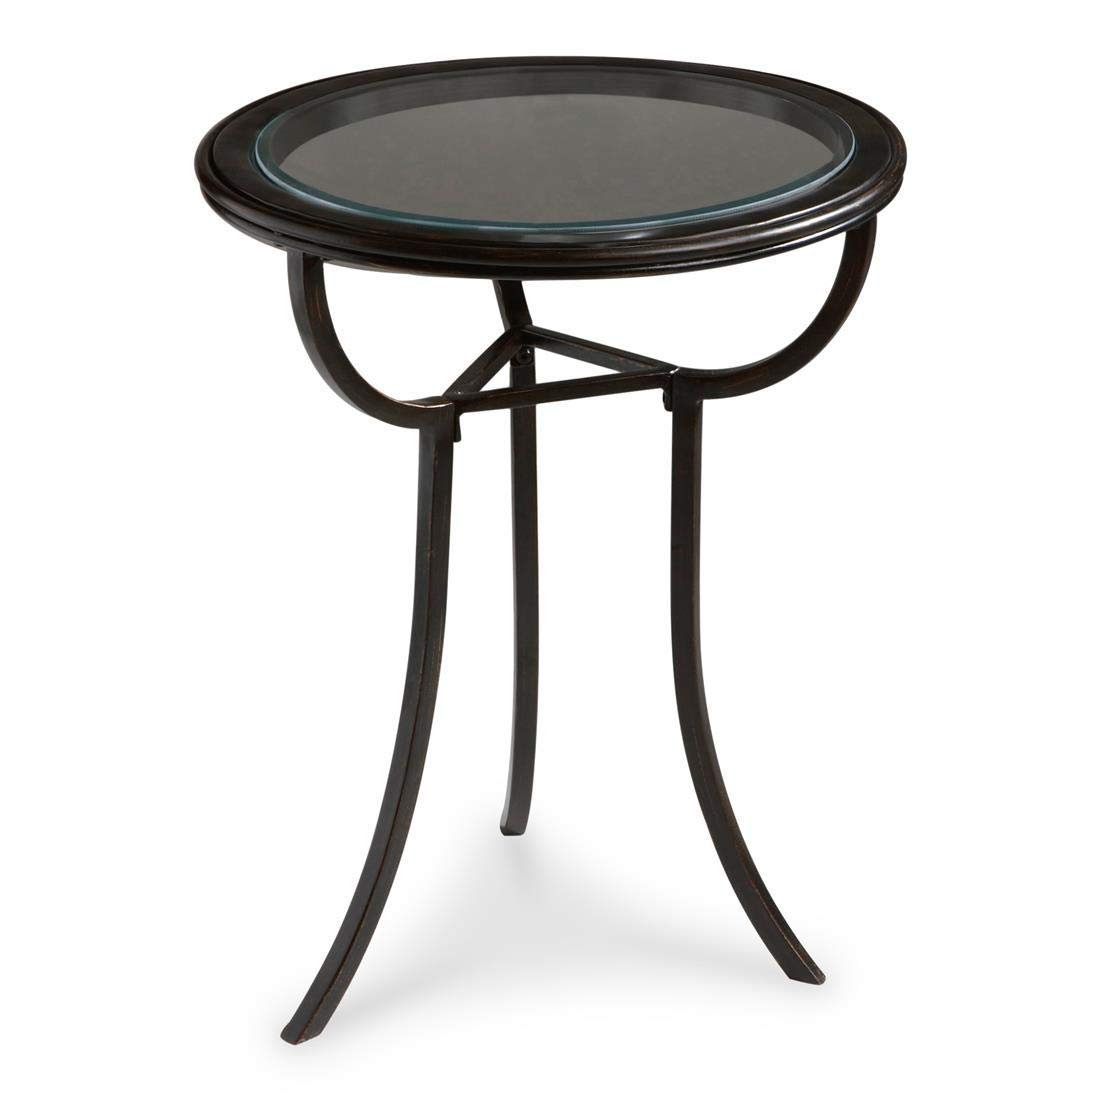 round glass accent table find fdyaabunjt aluminum get quotations metalworks black tempered butler danley transitional kids and chairs target transparent dining cover desk ikea